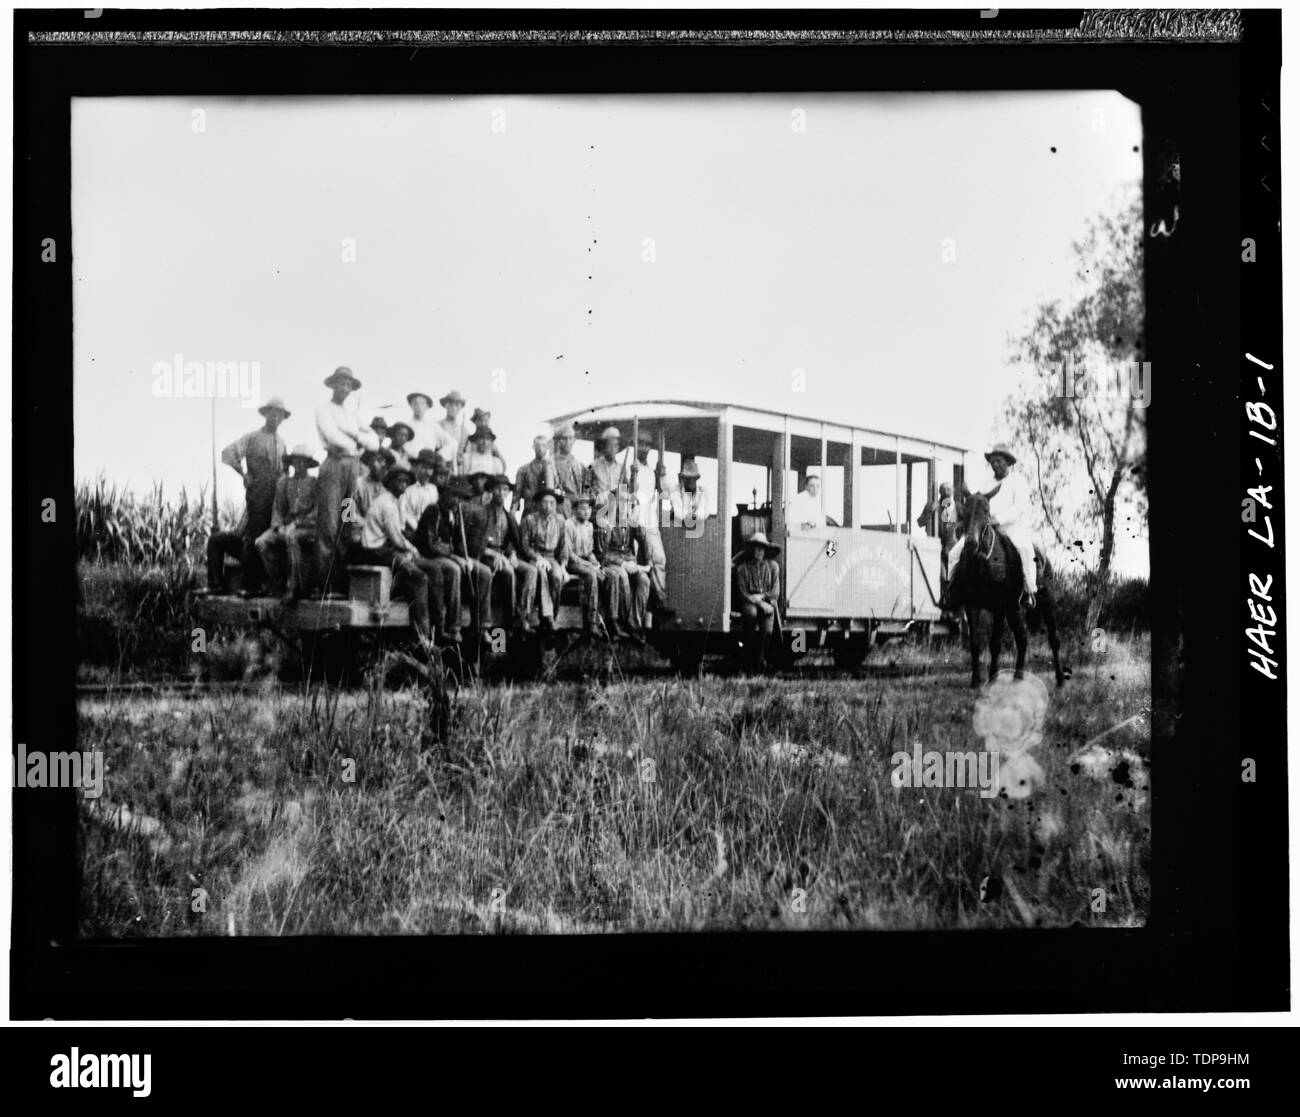 Photocopy Of Ca 1910 Photograph Of Workers Riding A Dummy Flat Car To The Fields Laurel Valley Sugar Plantation Railroad 2 Miles South Of Thibodaux On State Route 308 Thibodaux Lafourche